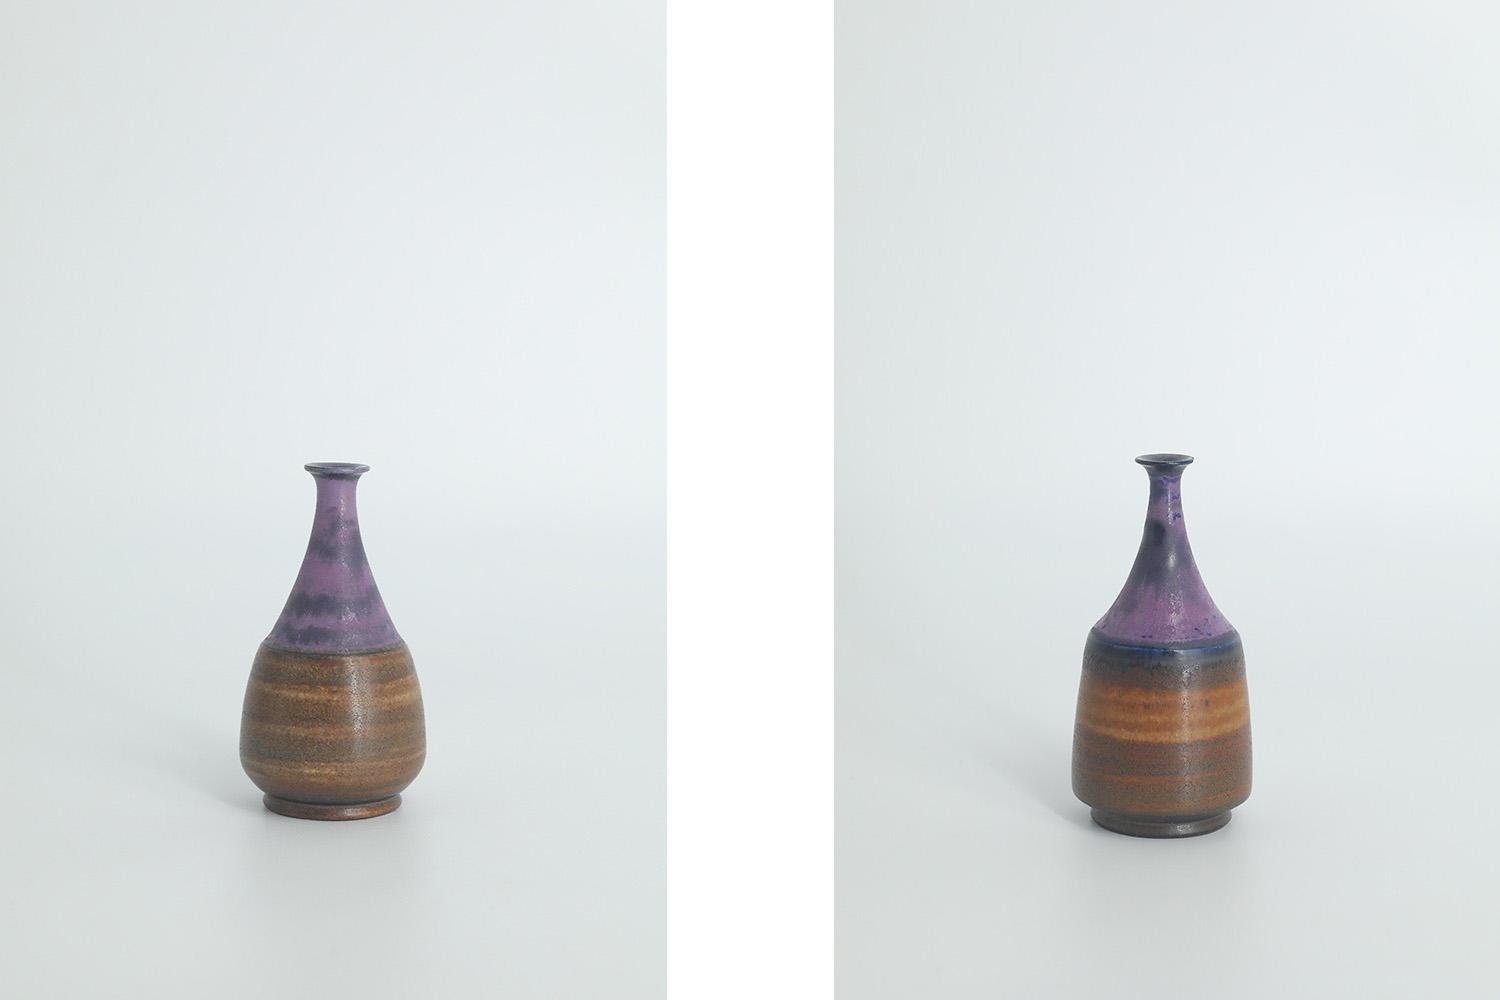 1. Height 8 cm  Width 4 cm  Depth 4 cm
2. Height 7 cm  Width 4 cm  Depth 4 cm
3. Height 7 cm  Width 4 cm  Depth 4 cm
4. Height 4 cm  Width 3 cm  Depth 3 cm

This set of 4 miniature vases was designed by Gunnar Borg for the Swedish manufacture